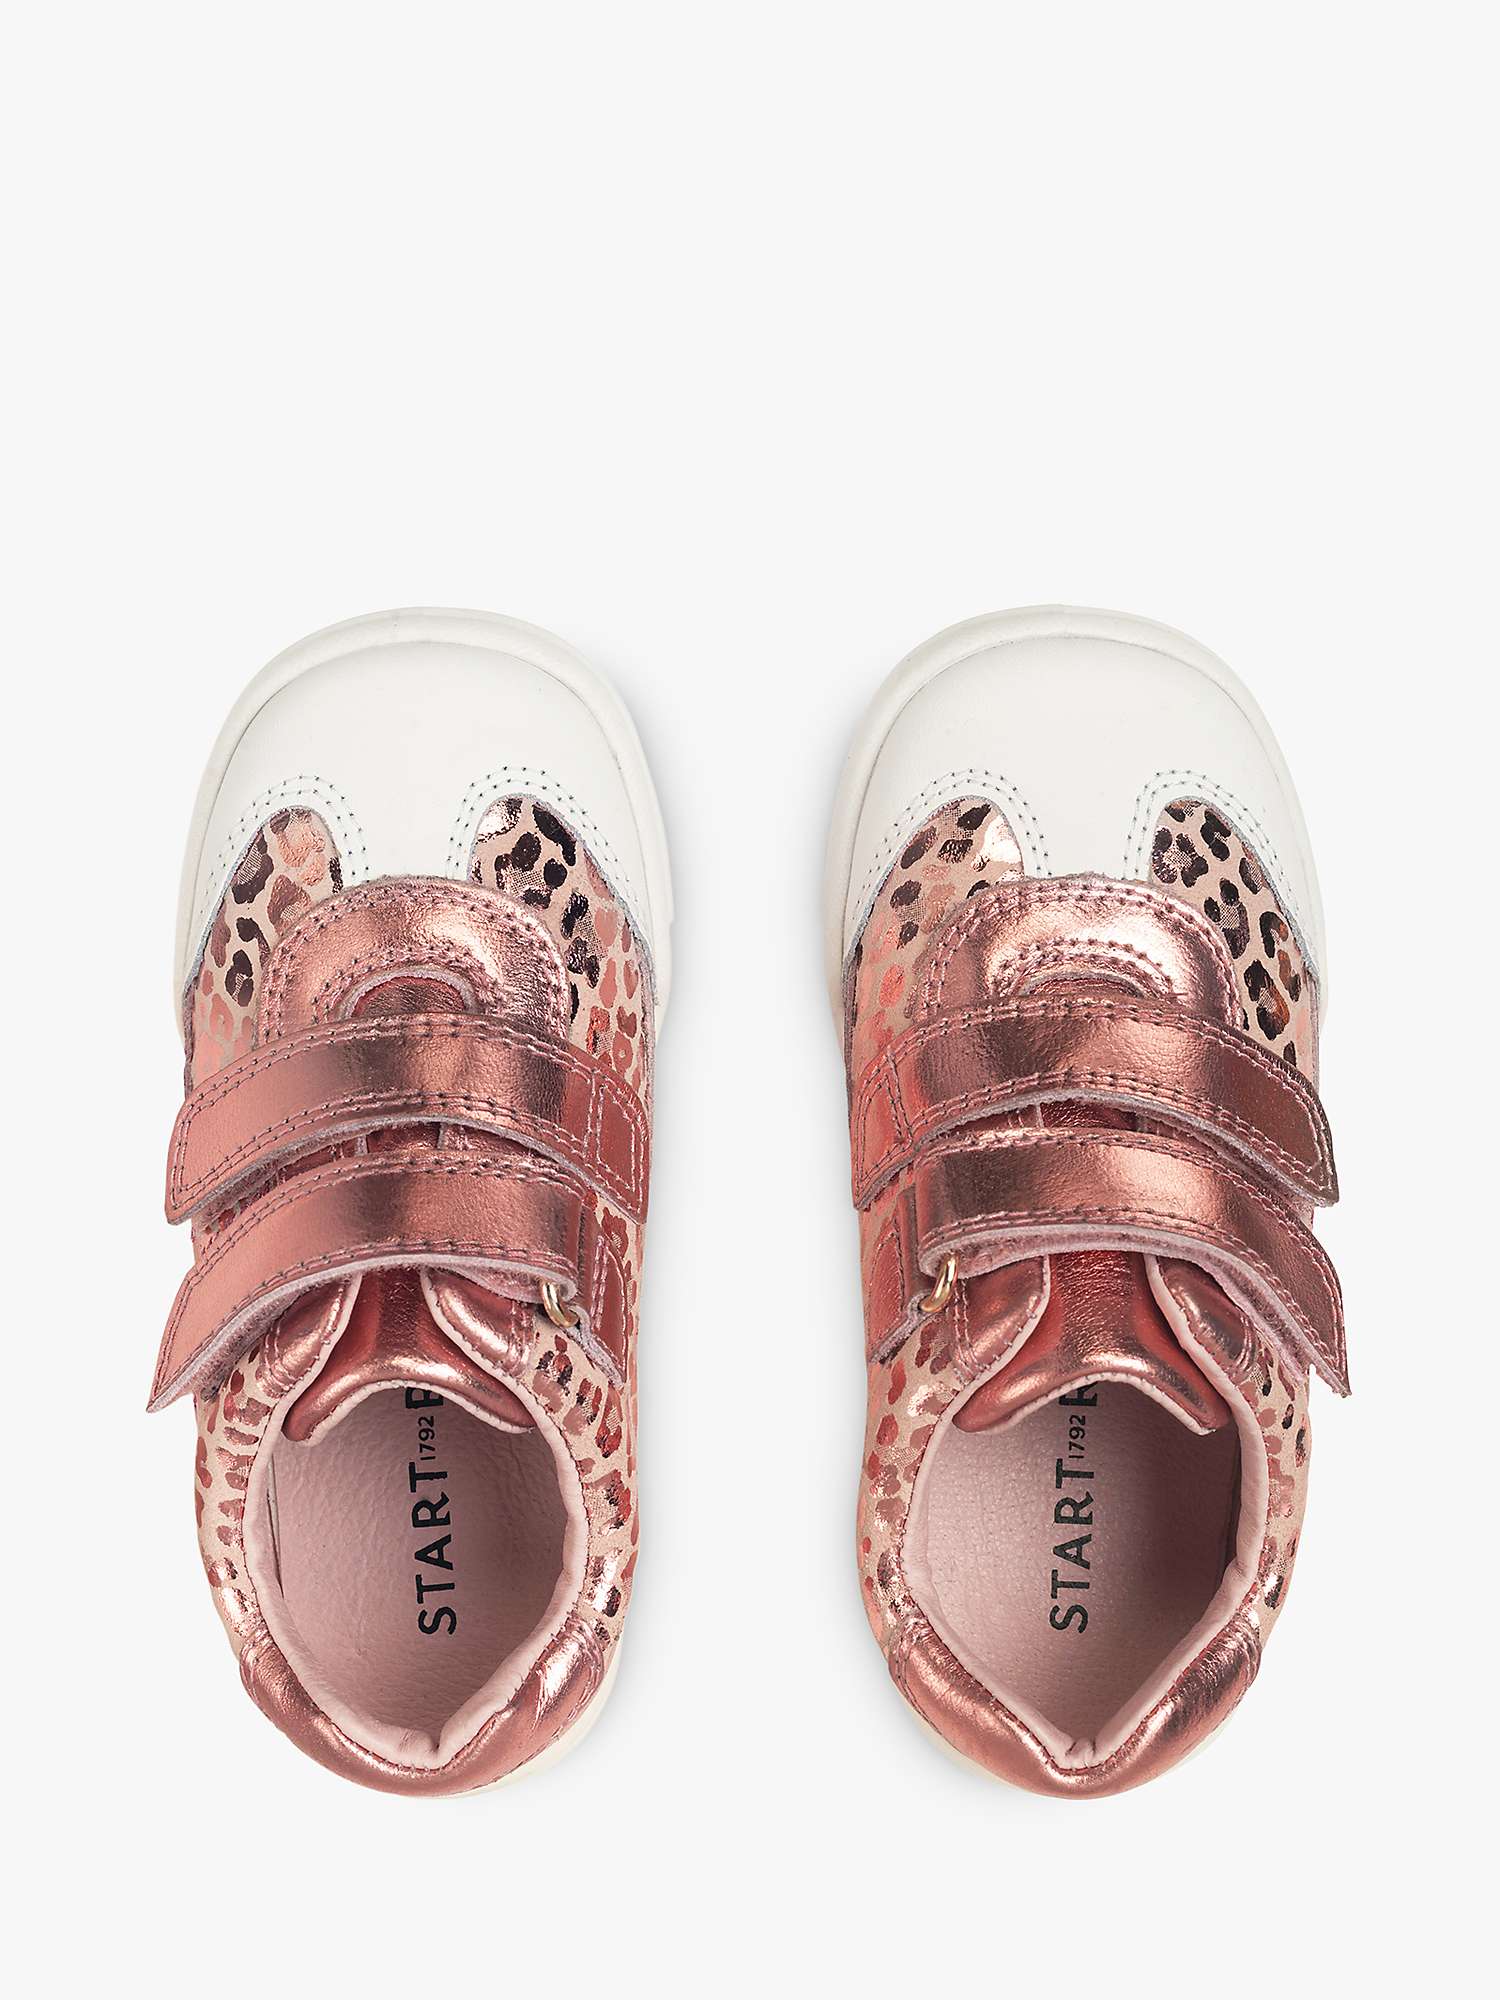 Buy Start-Rite Baby Roundabout Leather Leopard Print Rip Tape Pre Walker Shoes, Rose Gold Online at johnlewis.com